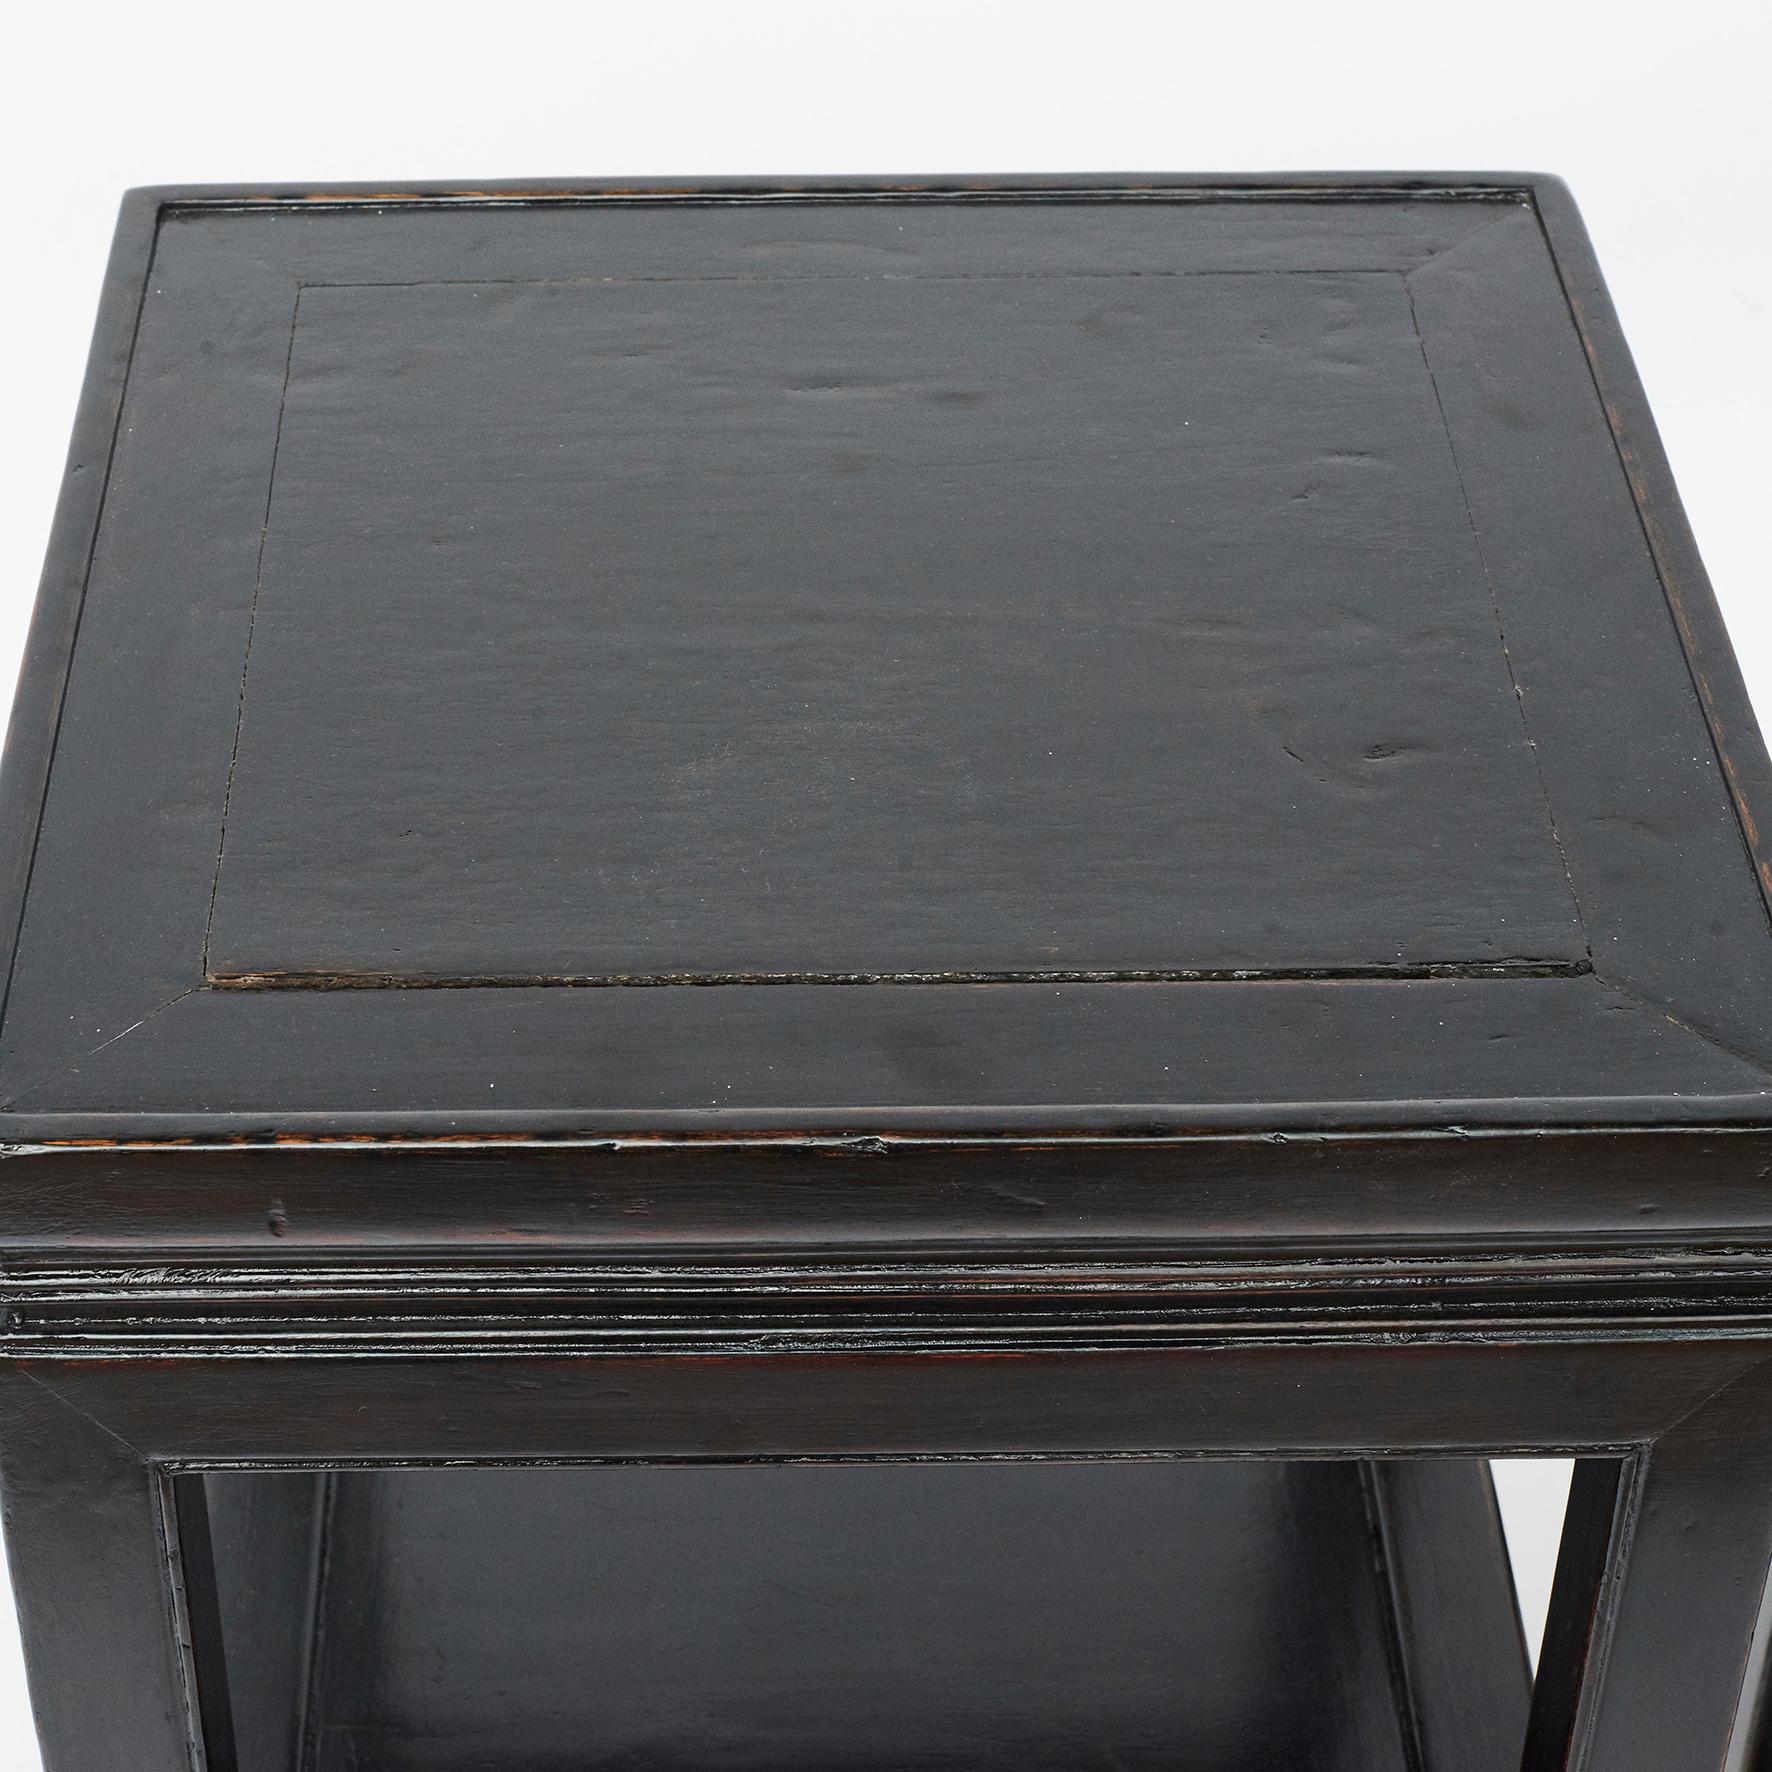 Pair of black lacquer end tables / side tables. Four square legs united by an under tier shelf and a geometric-shaped grid shelf below.
Beijing approx. 1910-1920.
Original age-related patina.